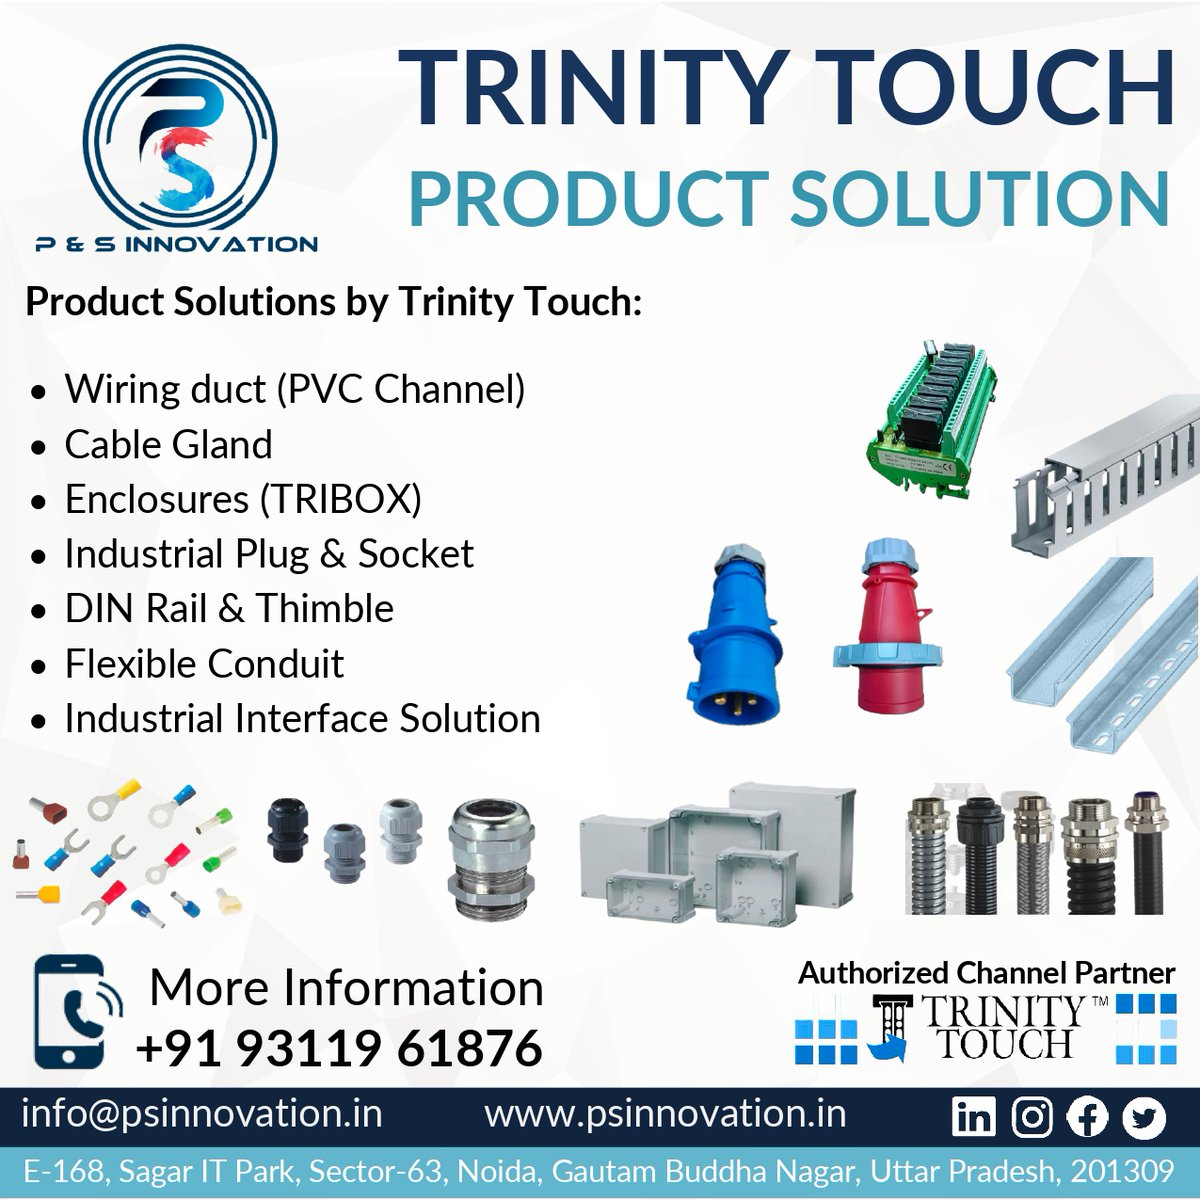 Trinity Touch is one of the leading manufacturers of industrial grade Enclosures, Cable Glands, Wiring Ducts, DIN Rails.

For More Information WhatsApp us on
wa.me/919821440617
#industrialautomation #trinitytouch